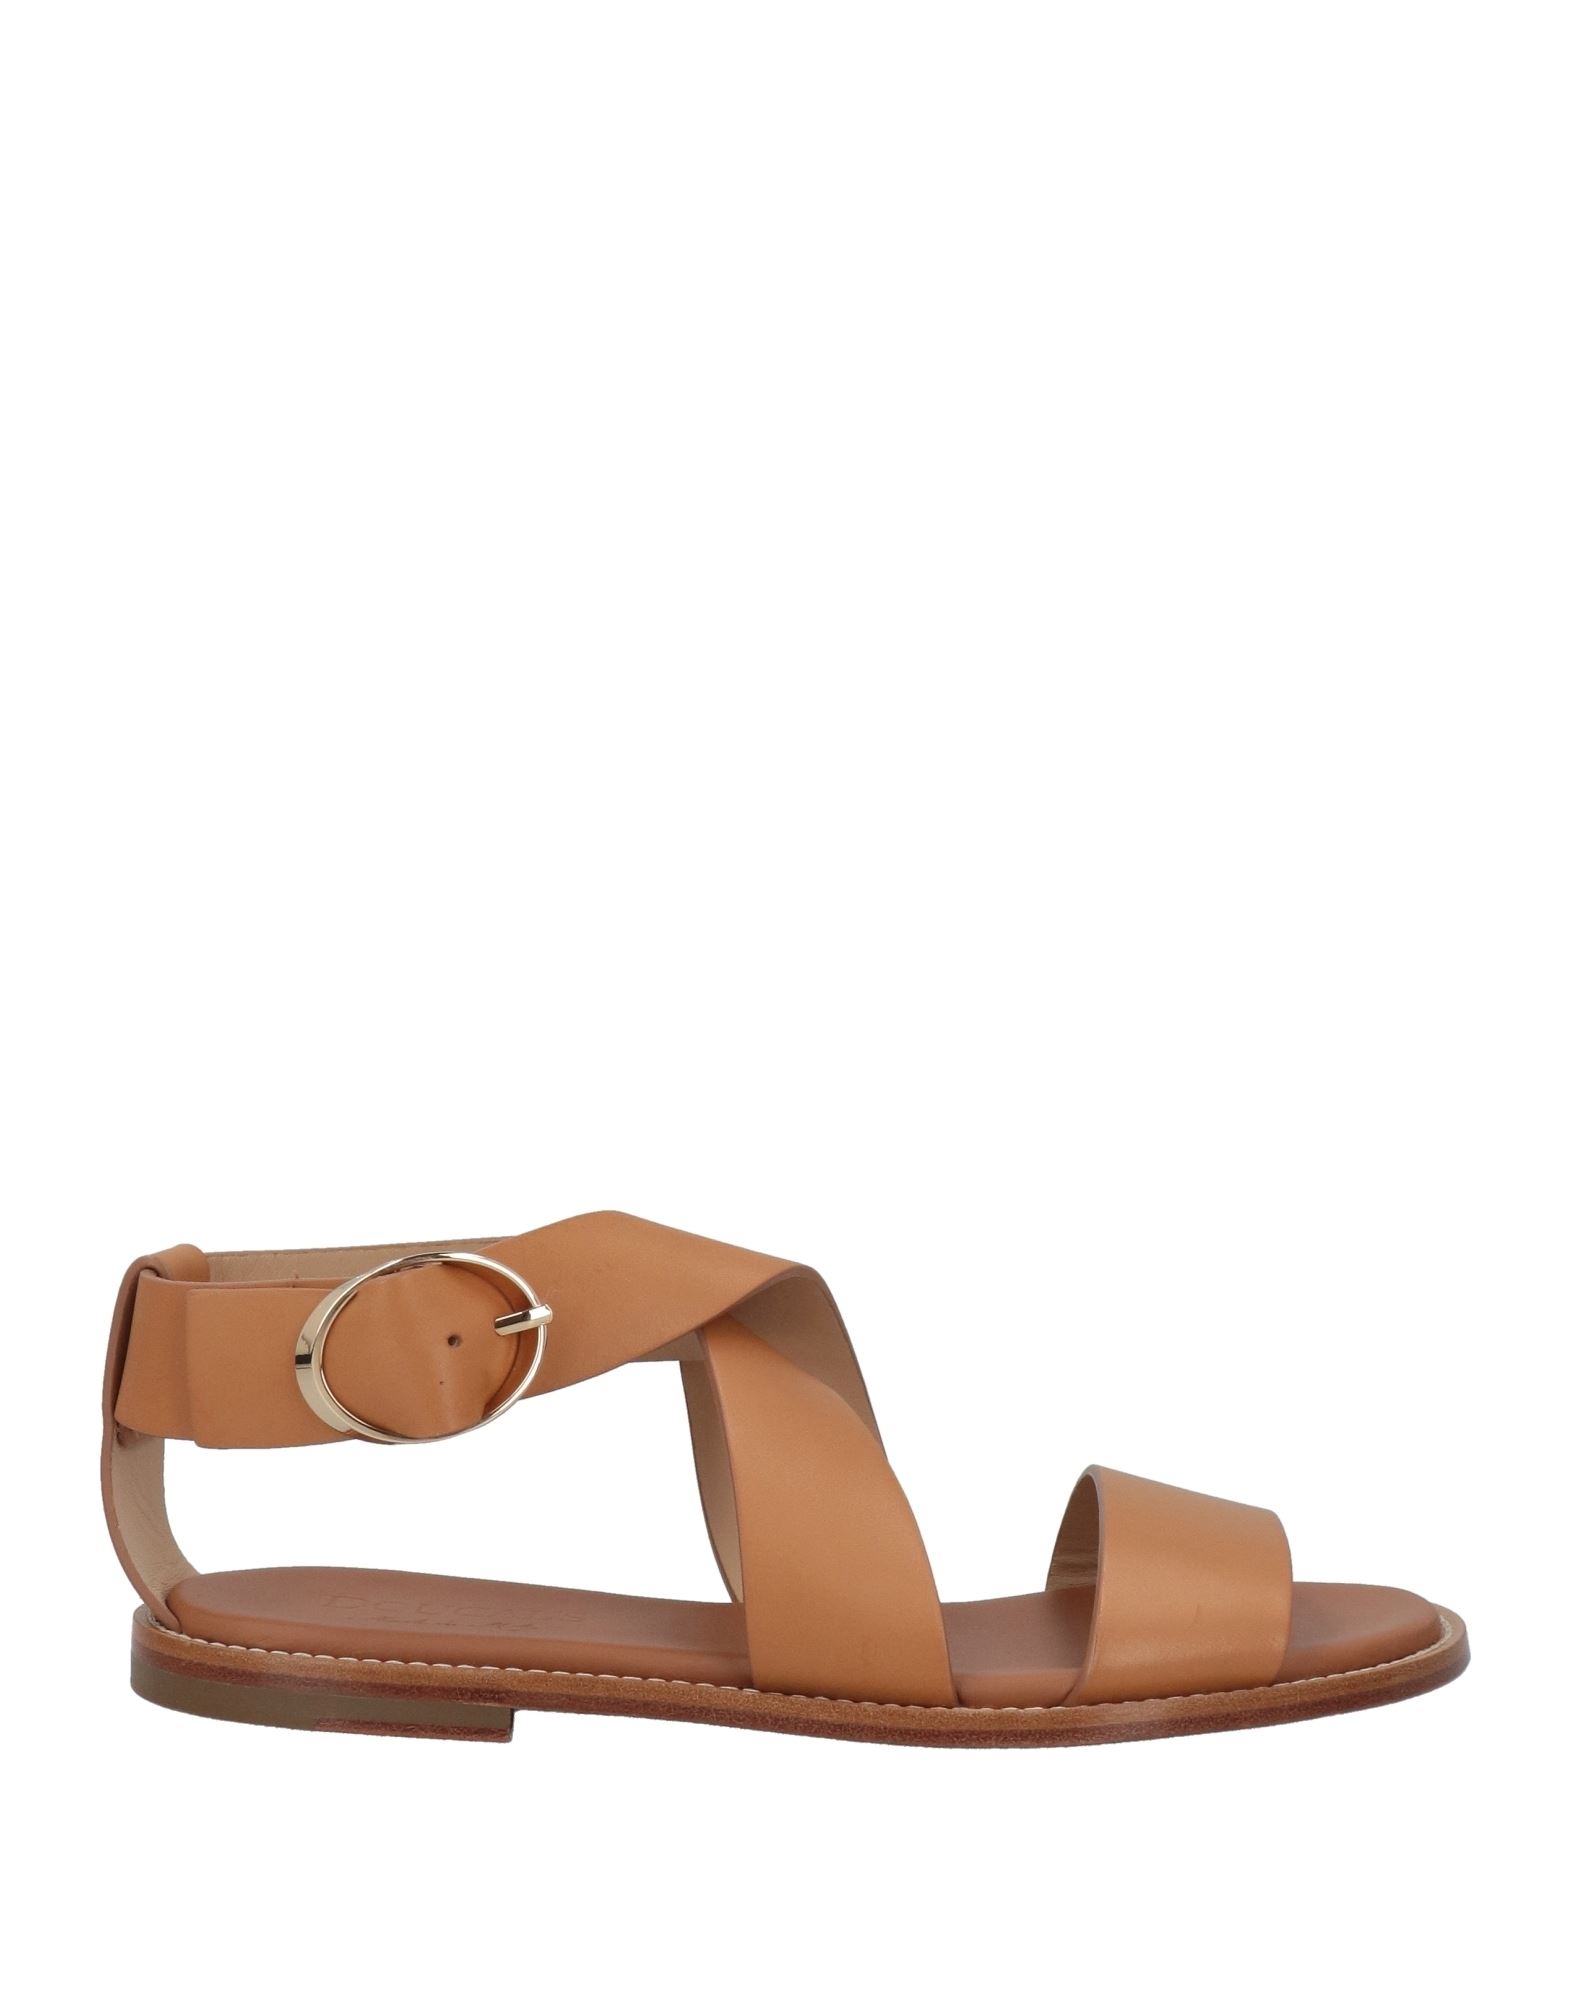 DOUCAL'S DOUCAL'S WOMAN SANDALS CAMEL SIZE 6 SOFT LEATHER